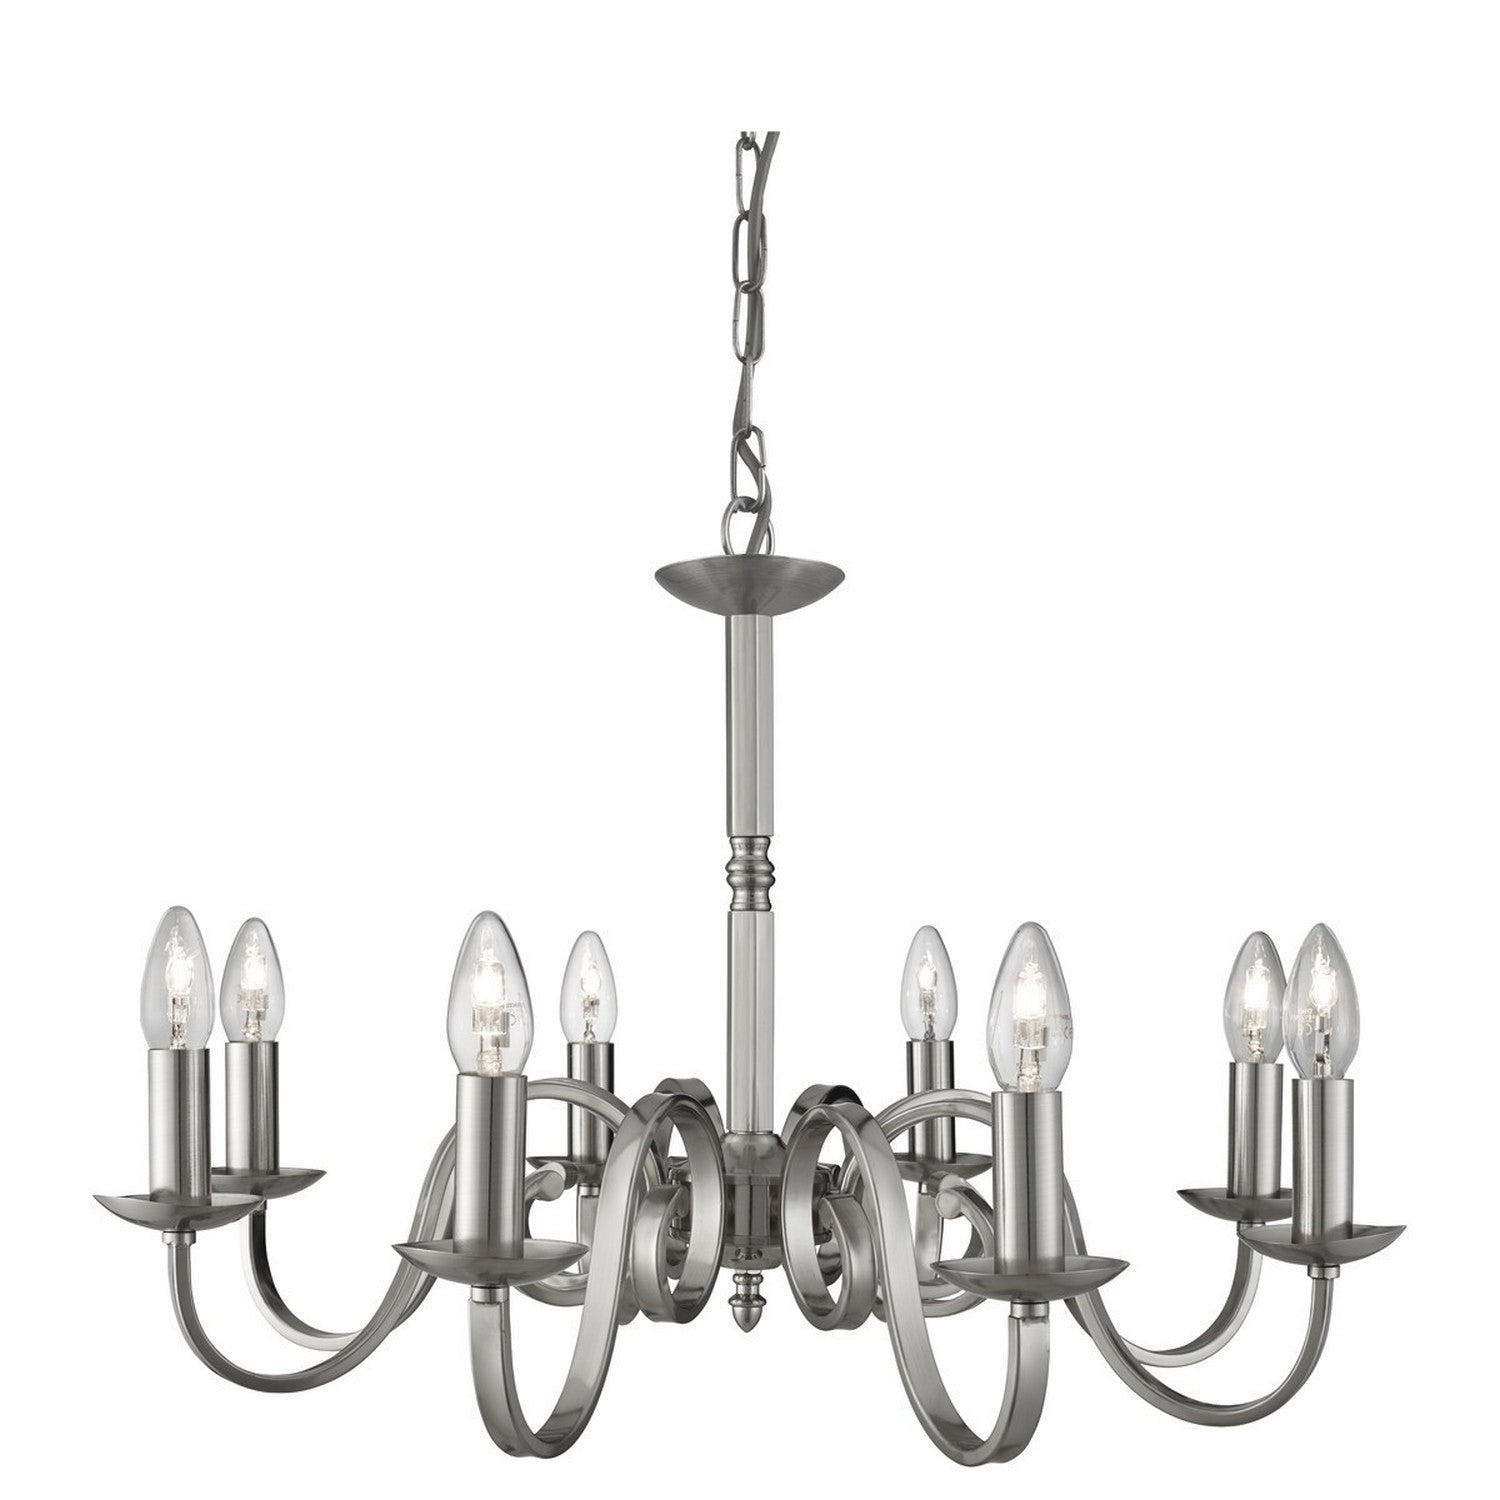 Richmond Satin Silver 8 Light Chandelier with Candle Style Sconces